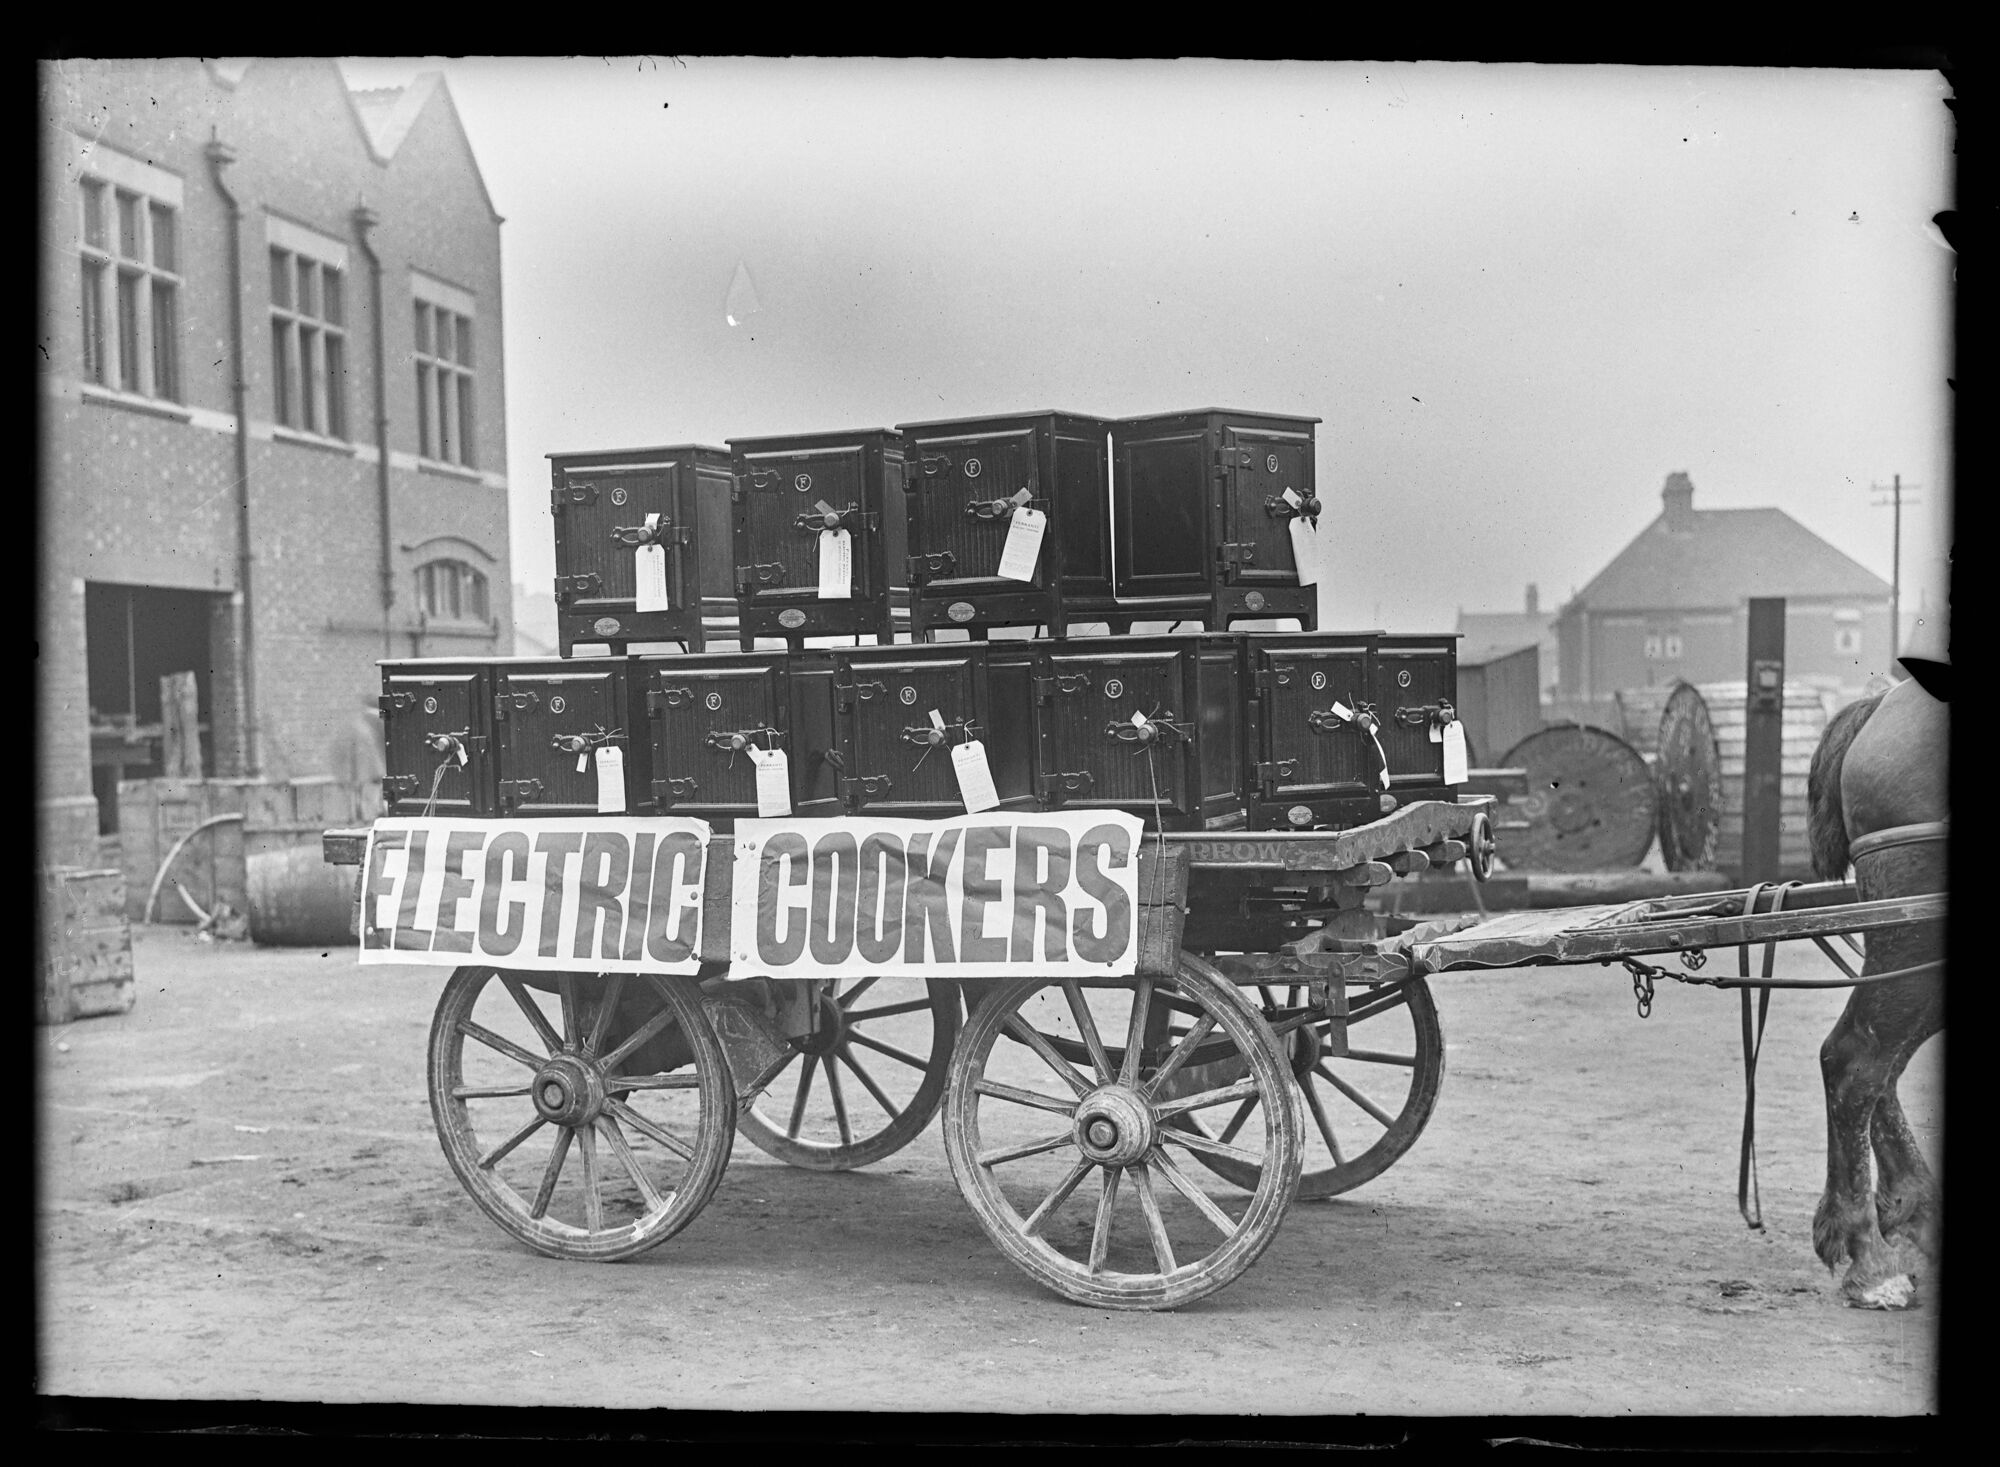 Electric cookers delivery cart, Barrow Corporation Electricity Wowks, Barrow-in-Furness